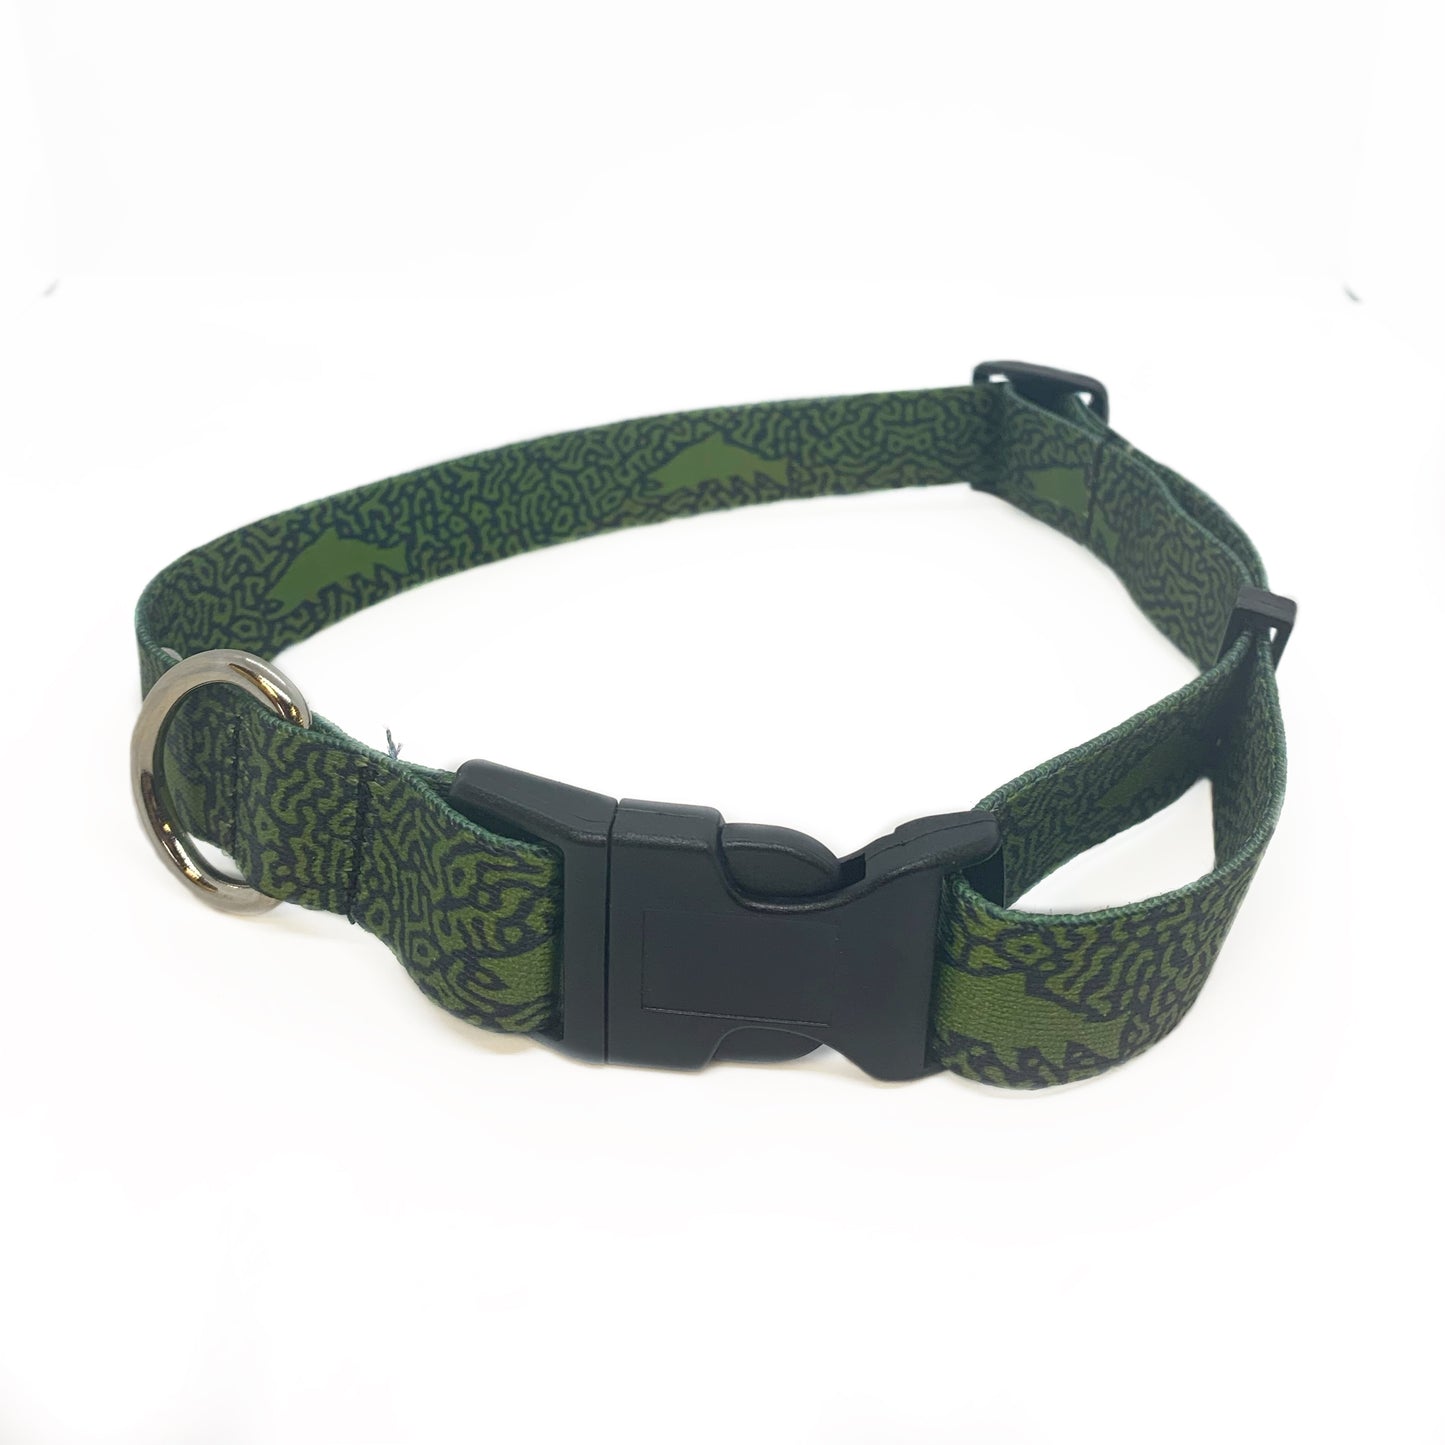 A navy nylon dog collar is shown. A green fish pattern is printed on it.